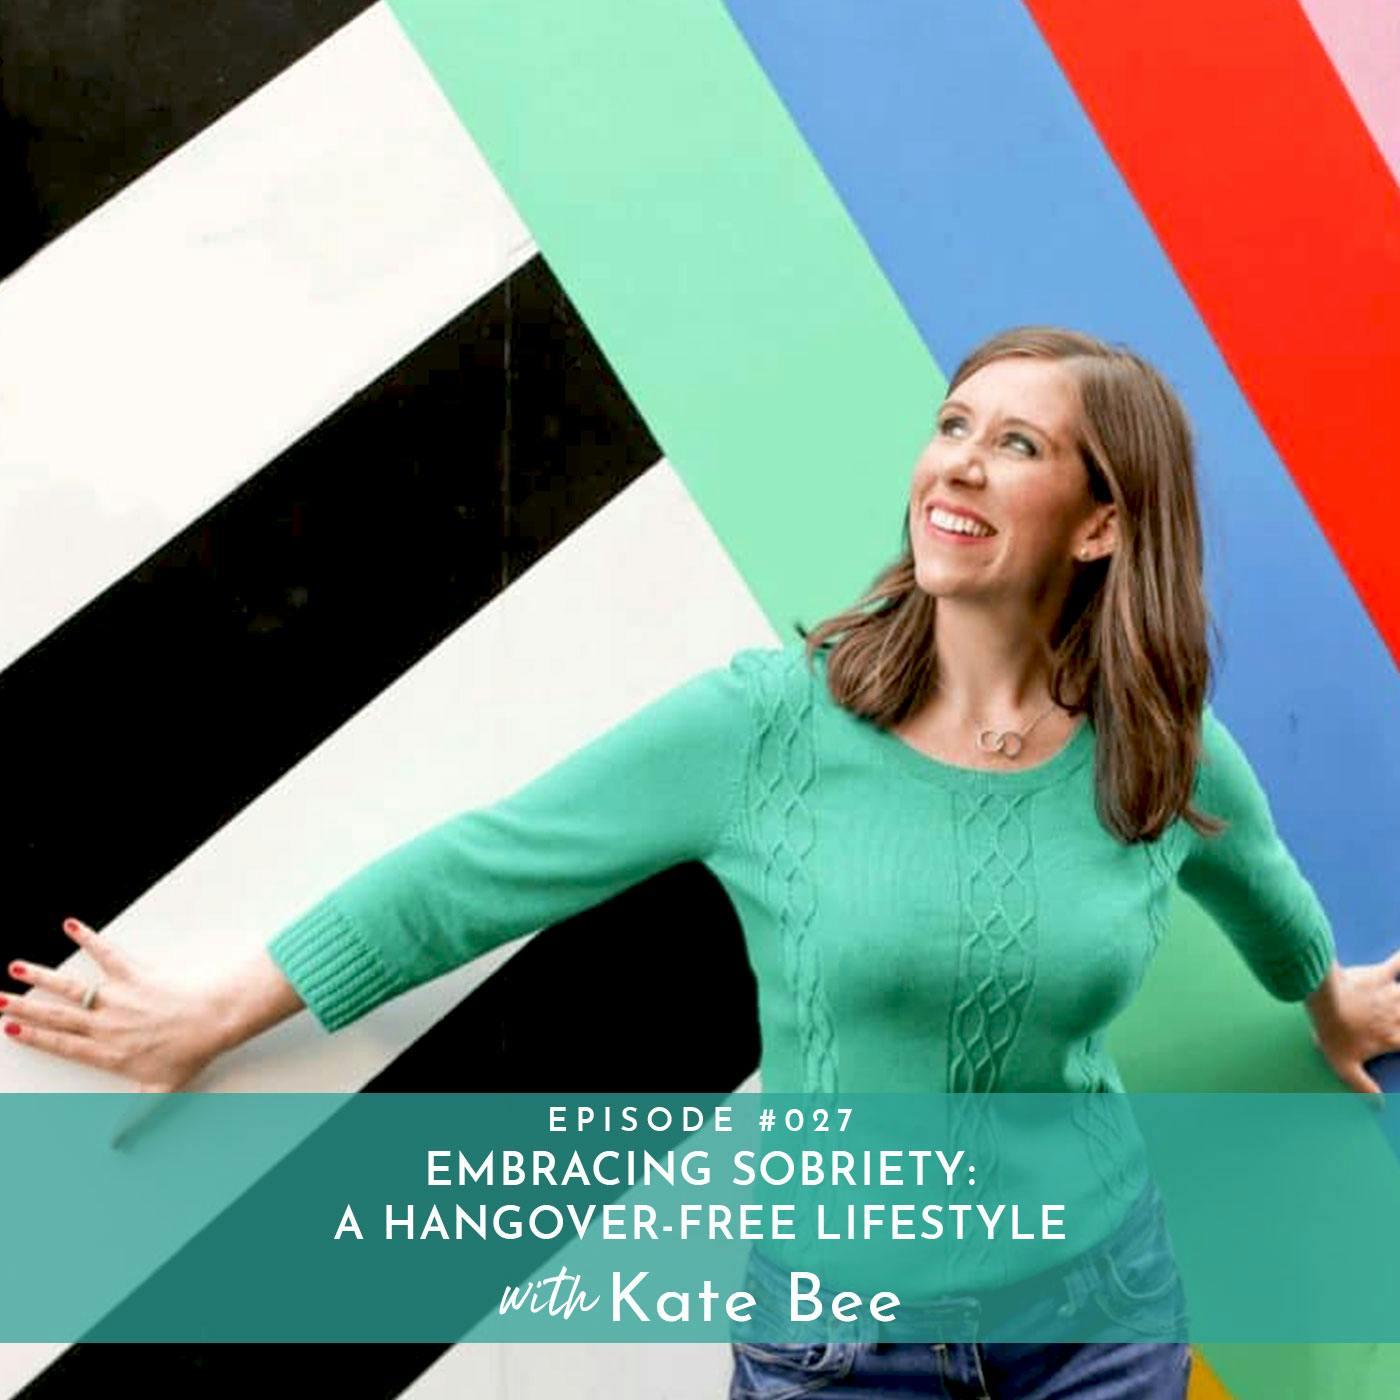 Embracing Sobriety: A Hangover-Free Lifestyle with Kate Bee